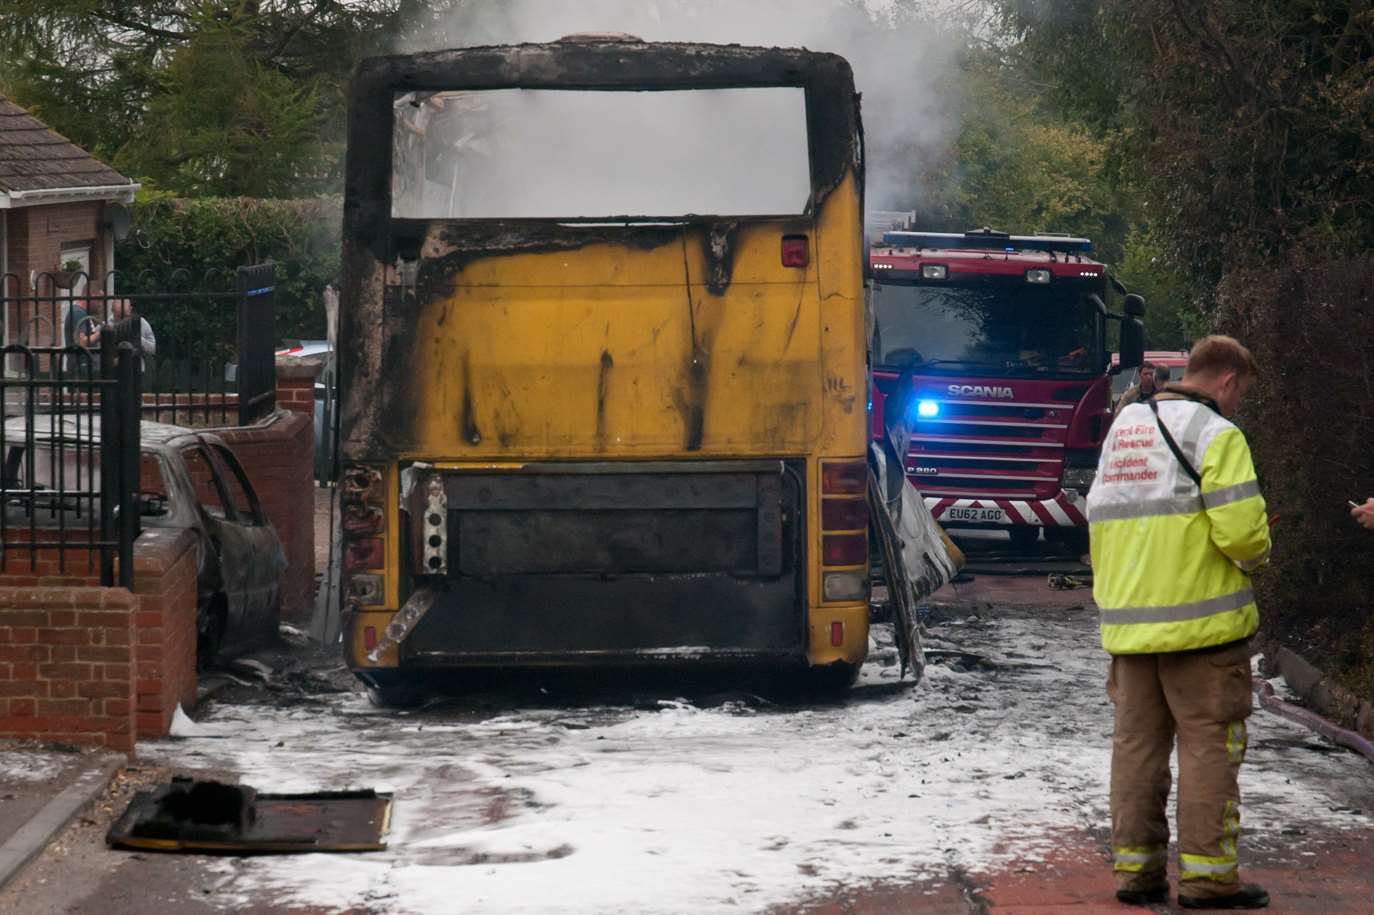 Emergency services at the scene of the dramatic coach blaze. Picture: Andy Flood